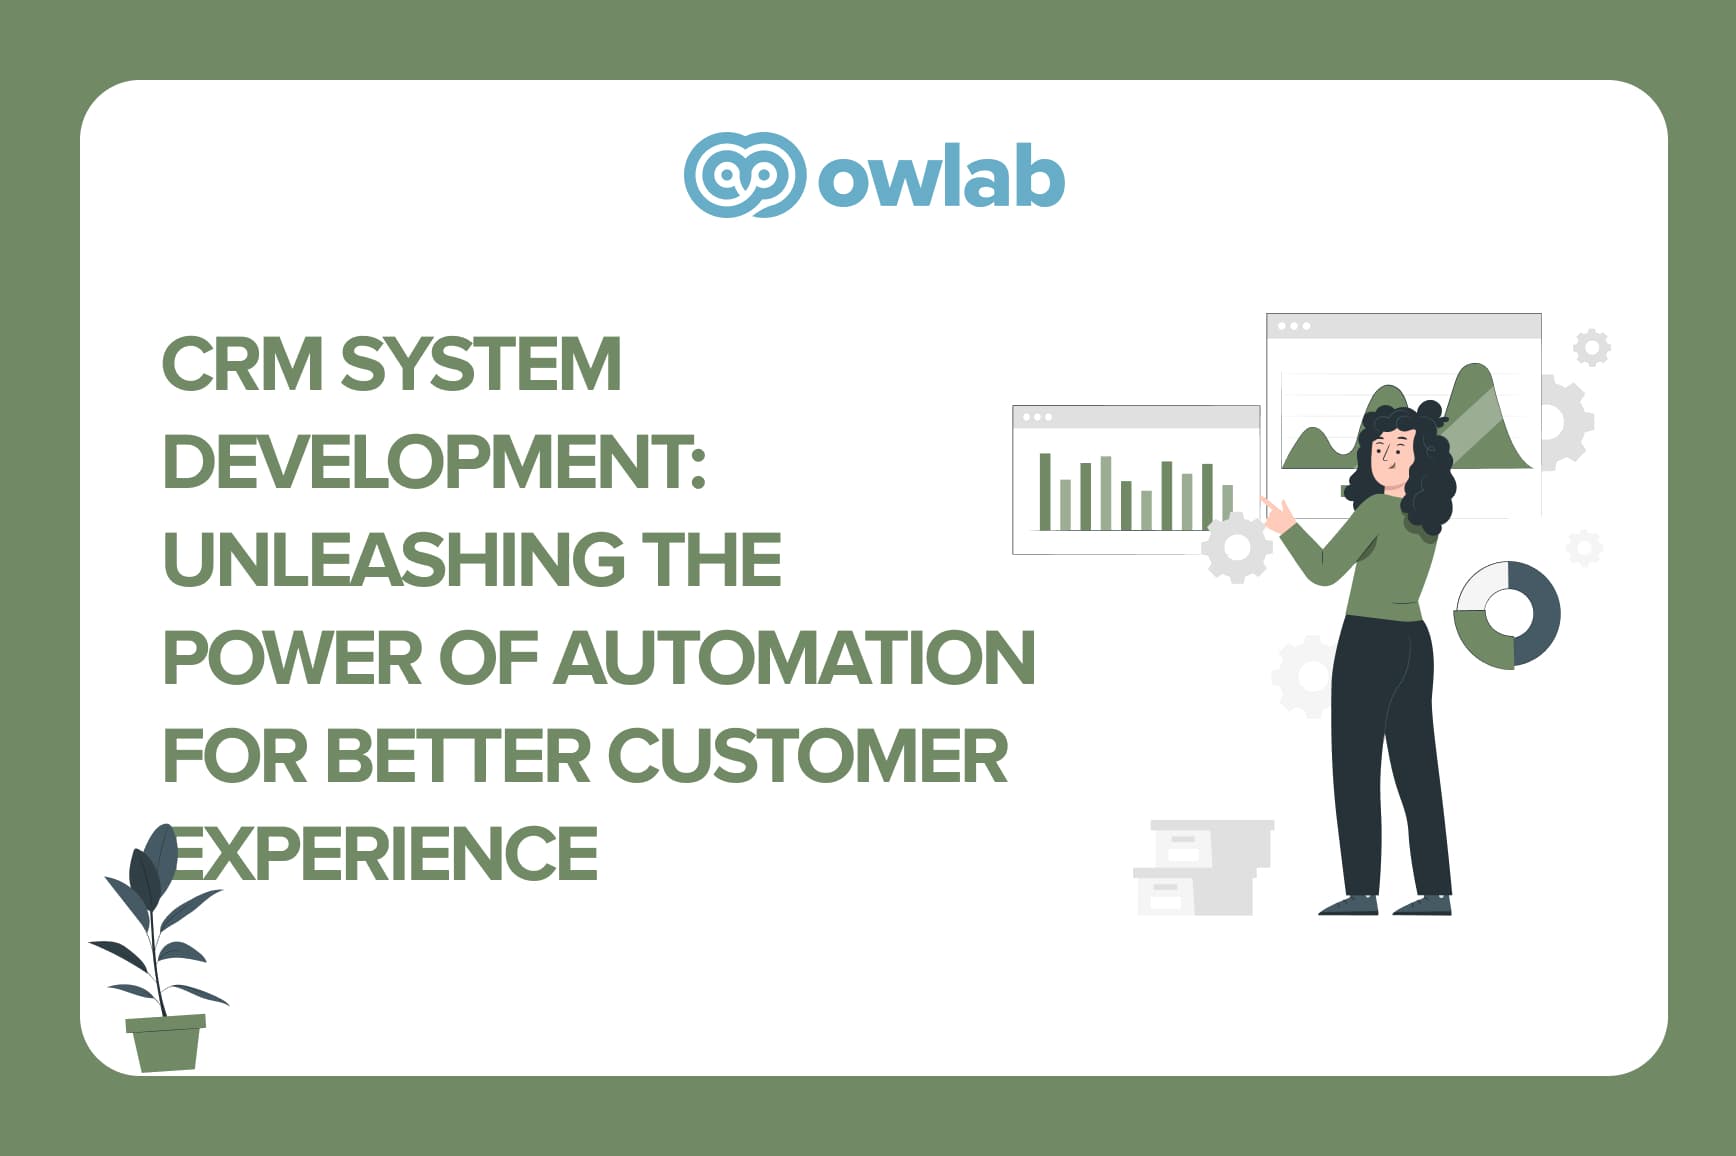 CRM System Development: Unleashing the Power of Automation for Better Customer Experience